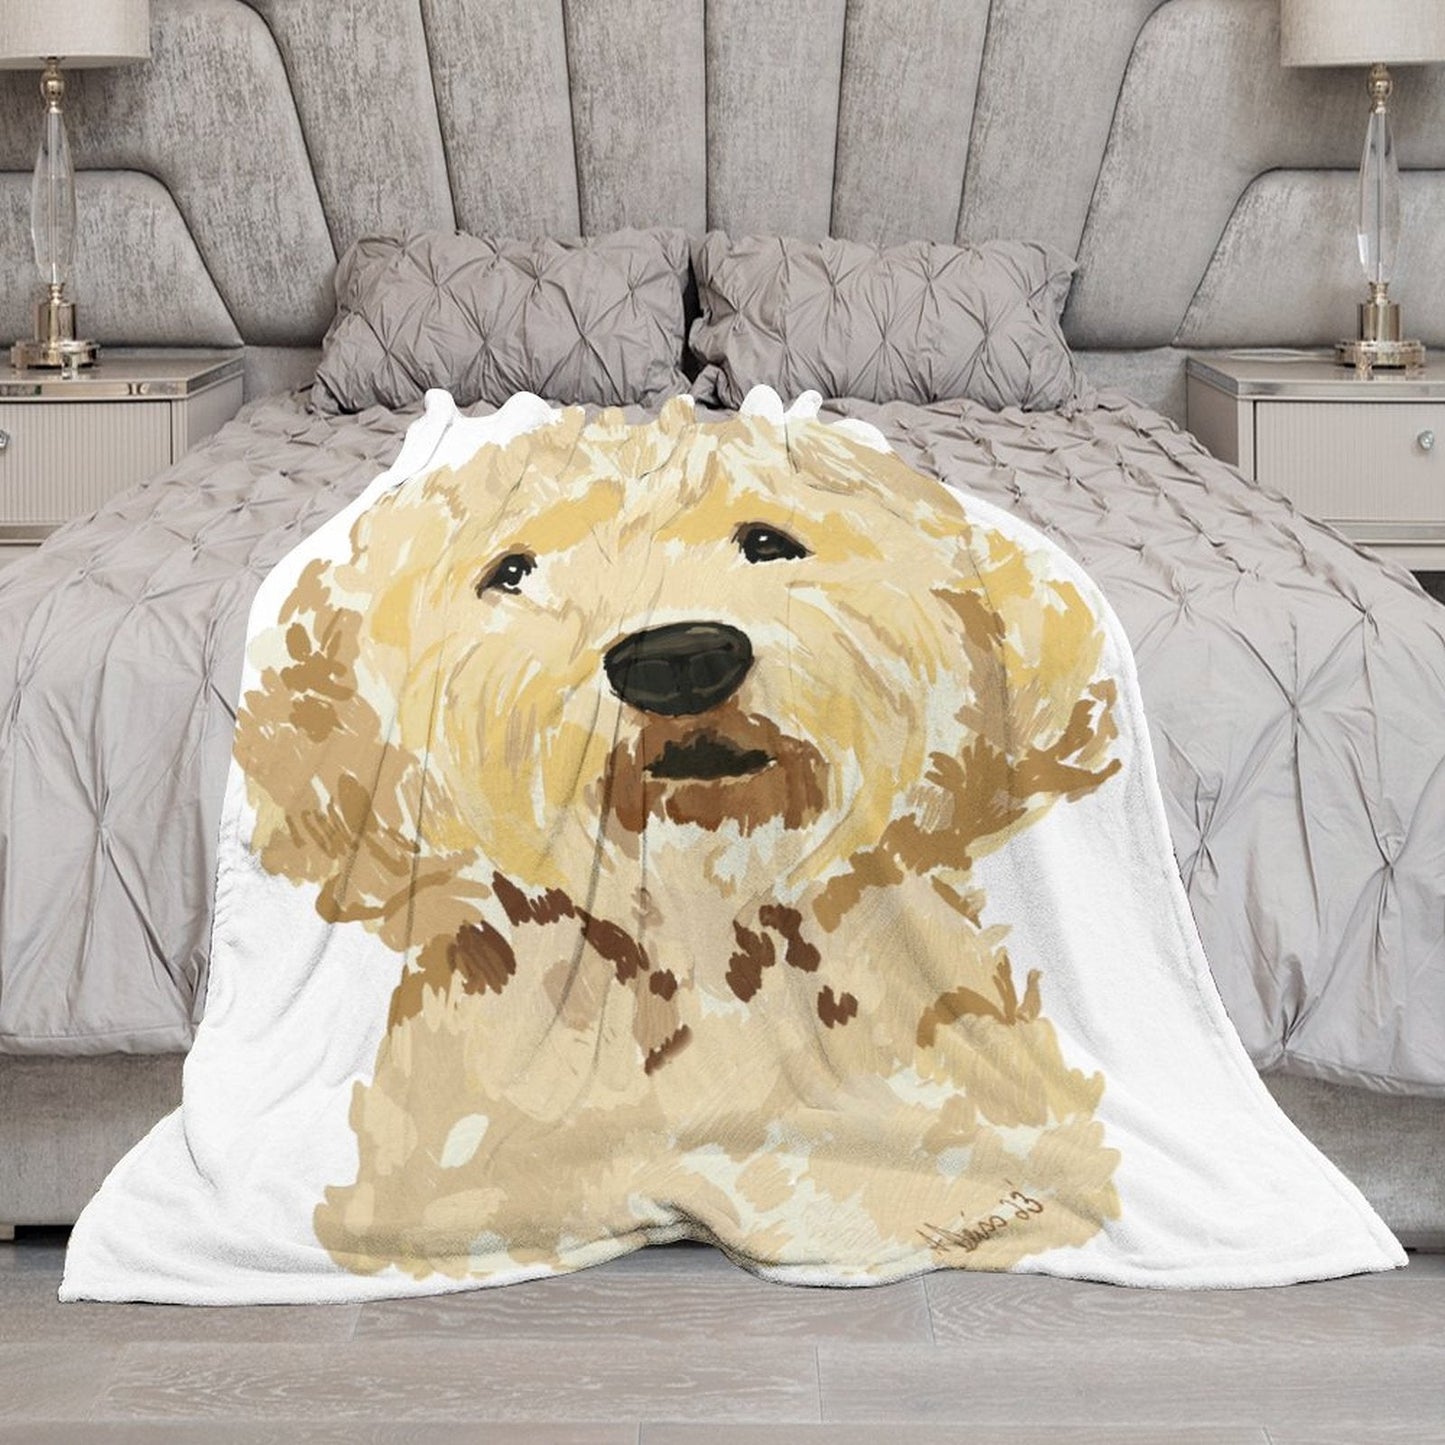 GoldenDoodle Flannel Blanket-40"x50" (Dual-sided Printing) - Blue Cava